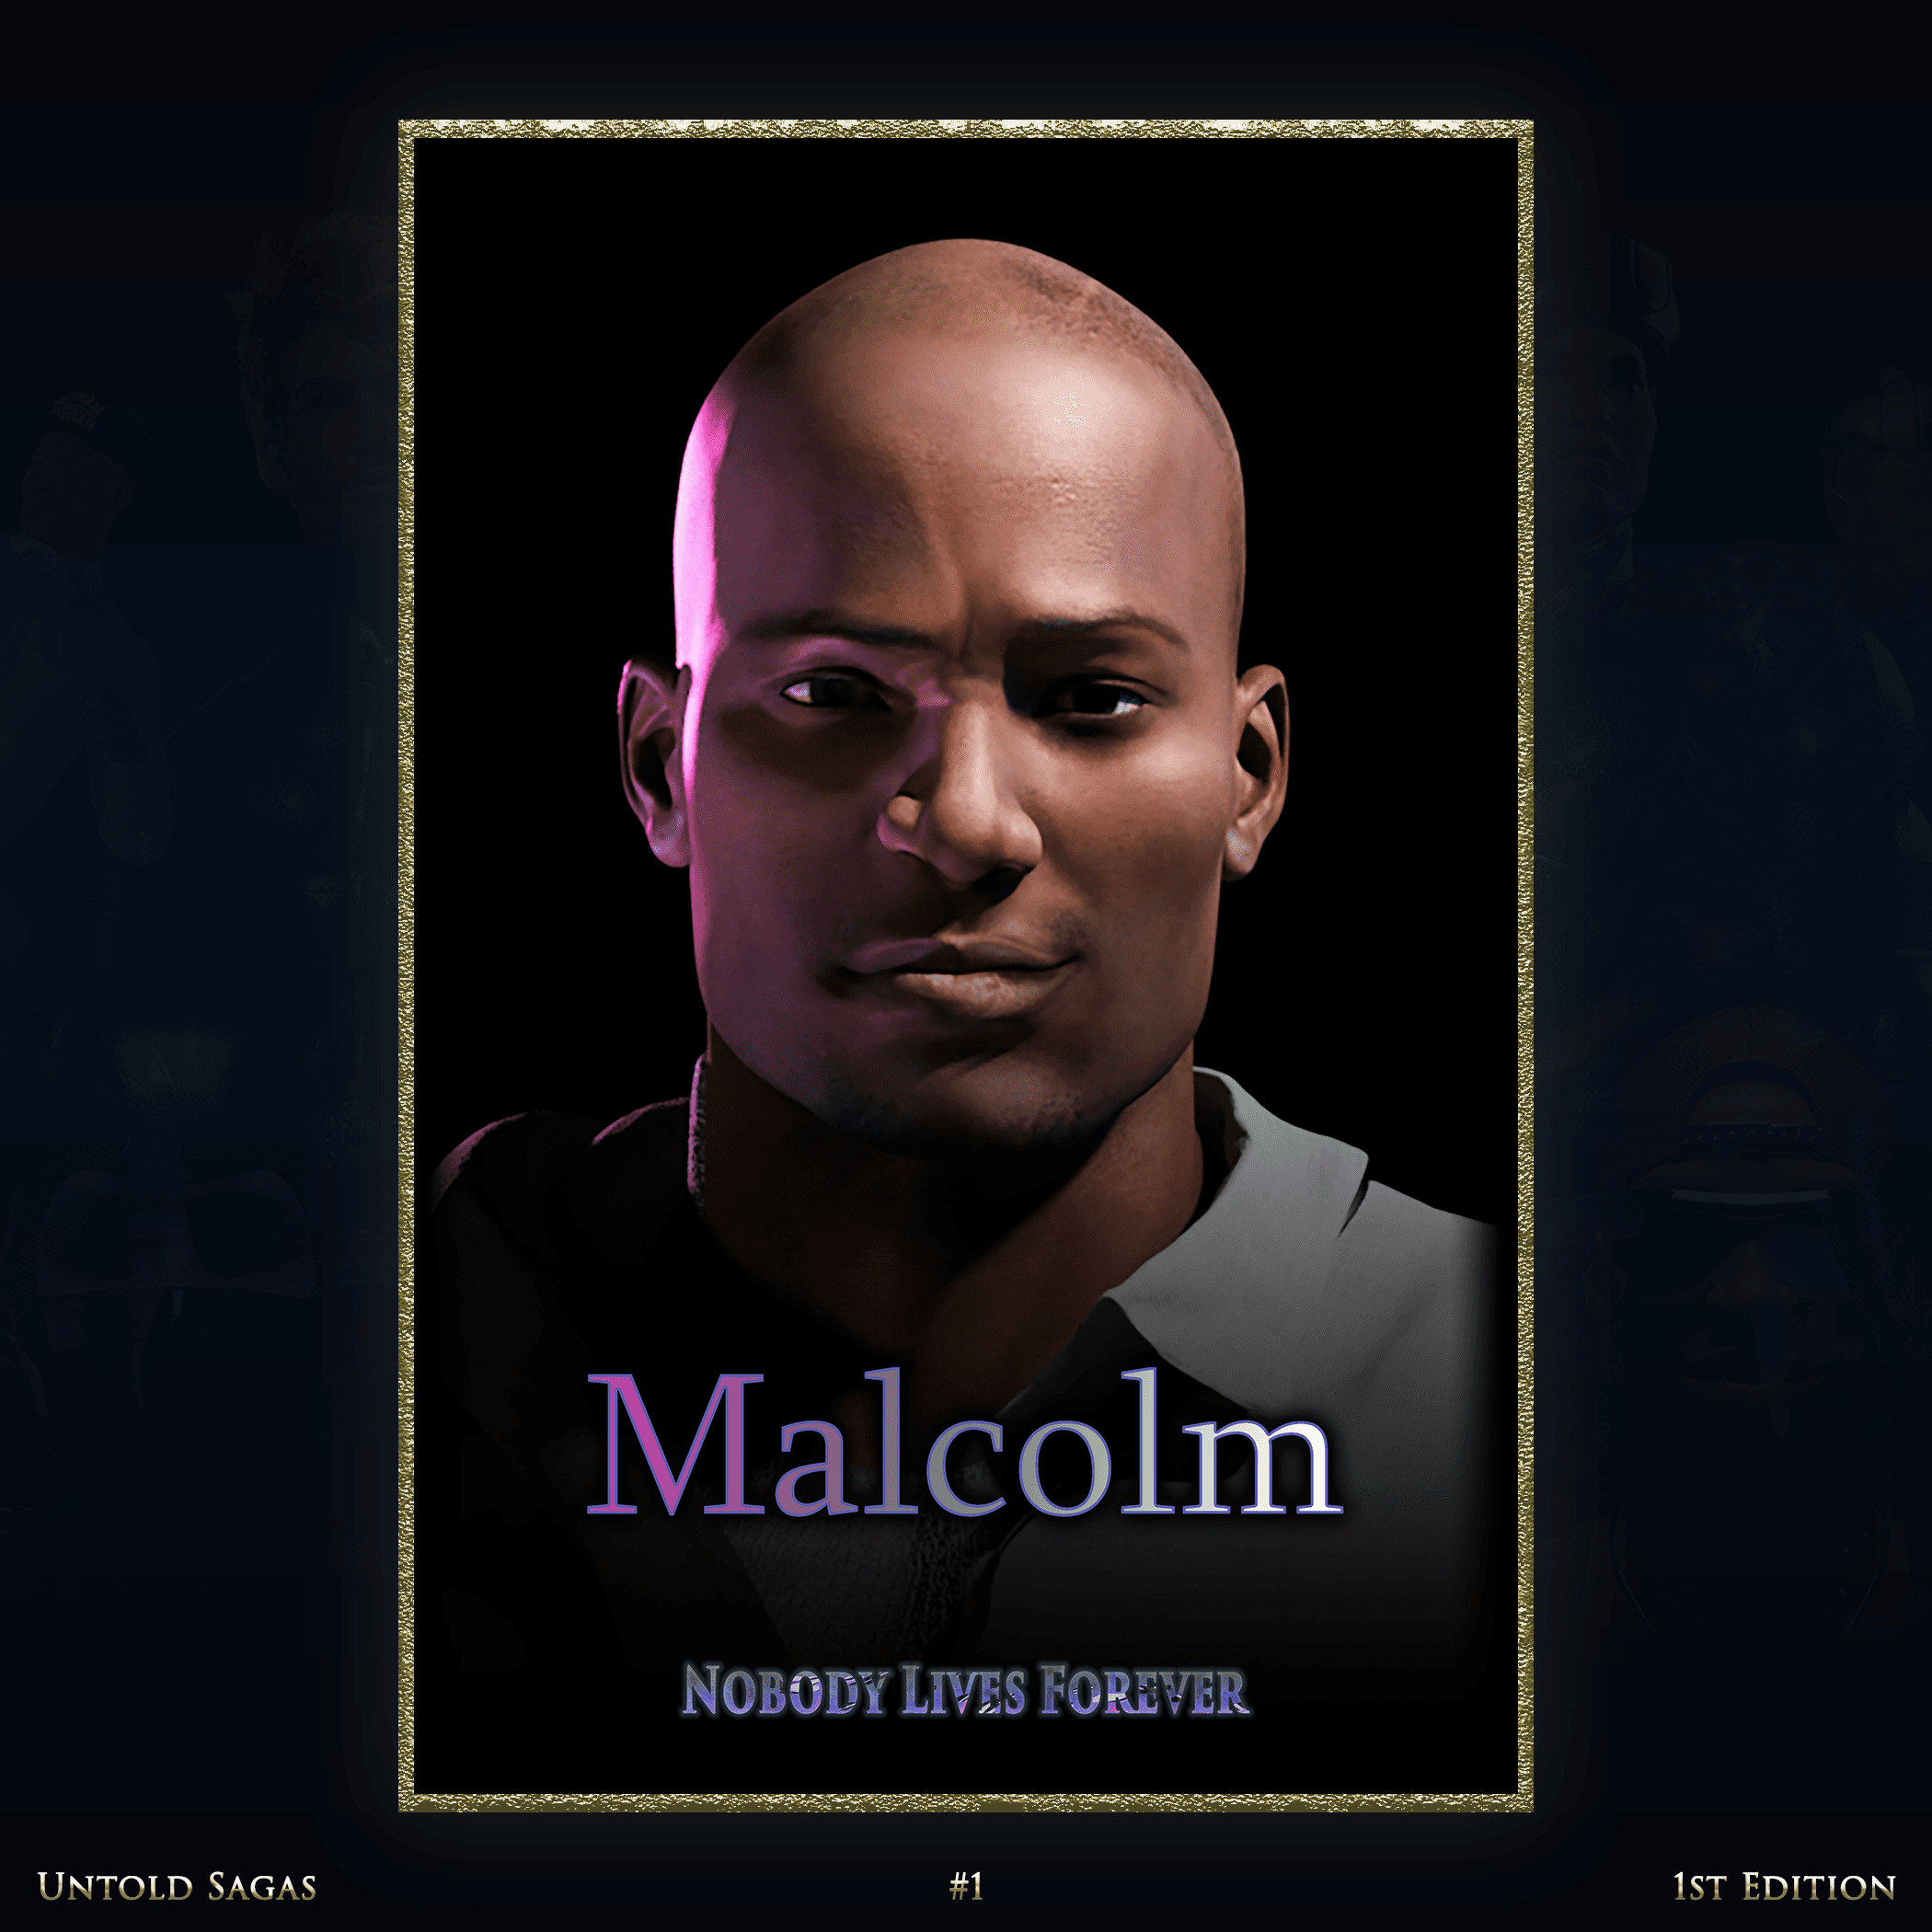 Character Card	1st Edition	Malcolm	#1